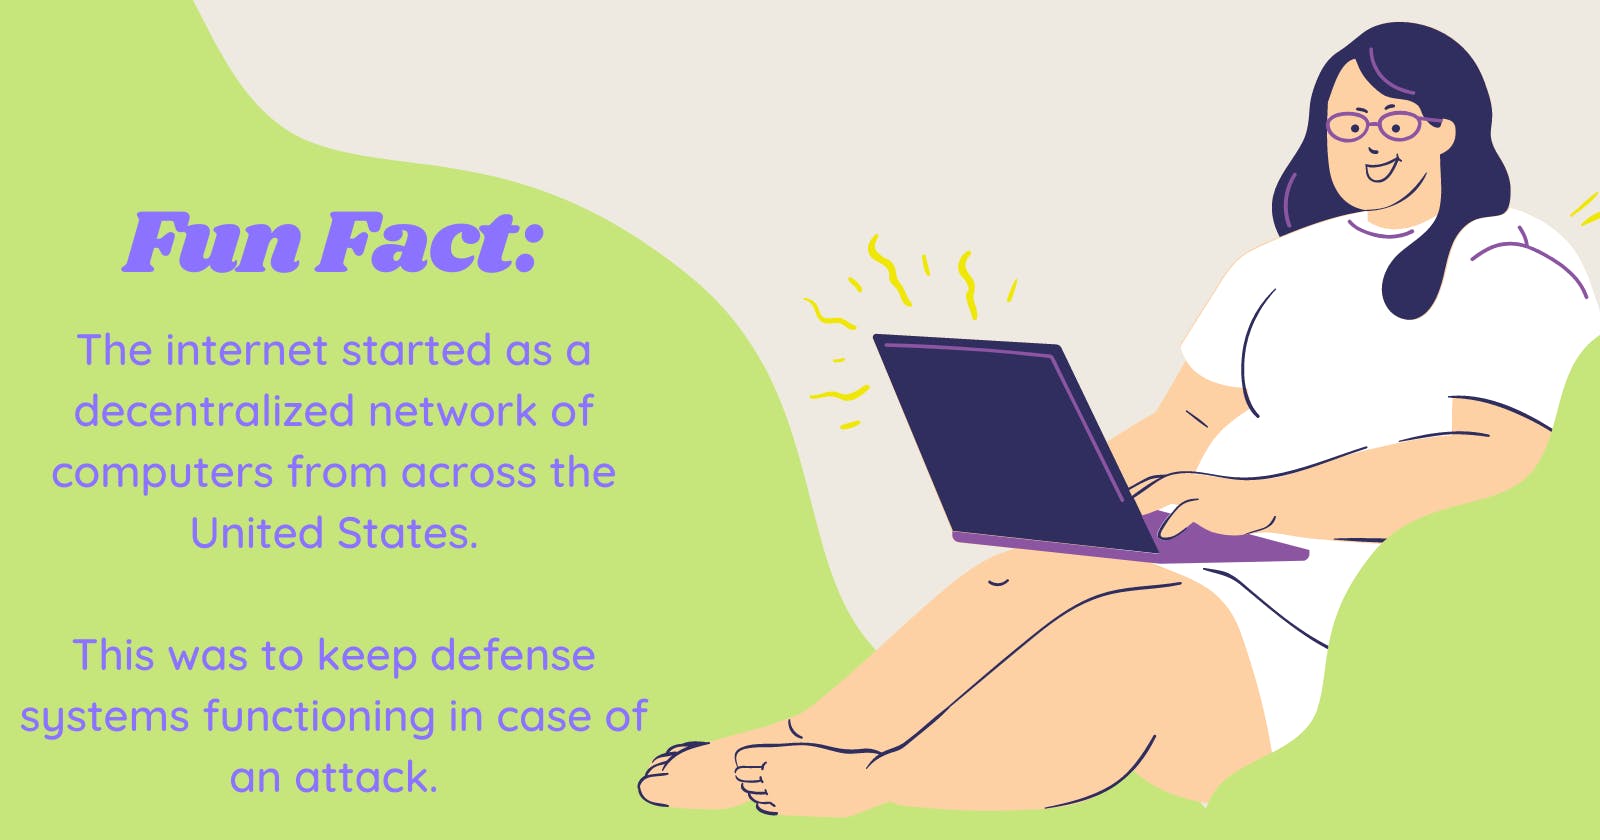 Fun fact: The internet started as a decentralized network of computers from across the United States. This was to keep defense systems operational in the event of an attack.